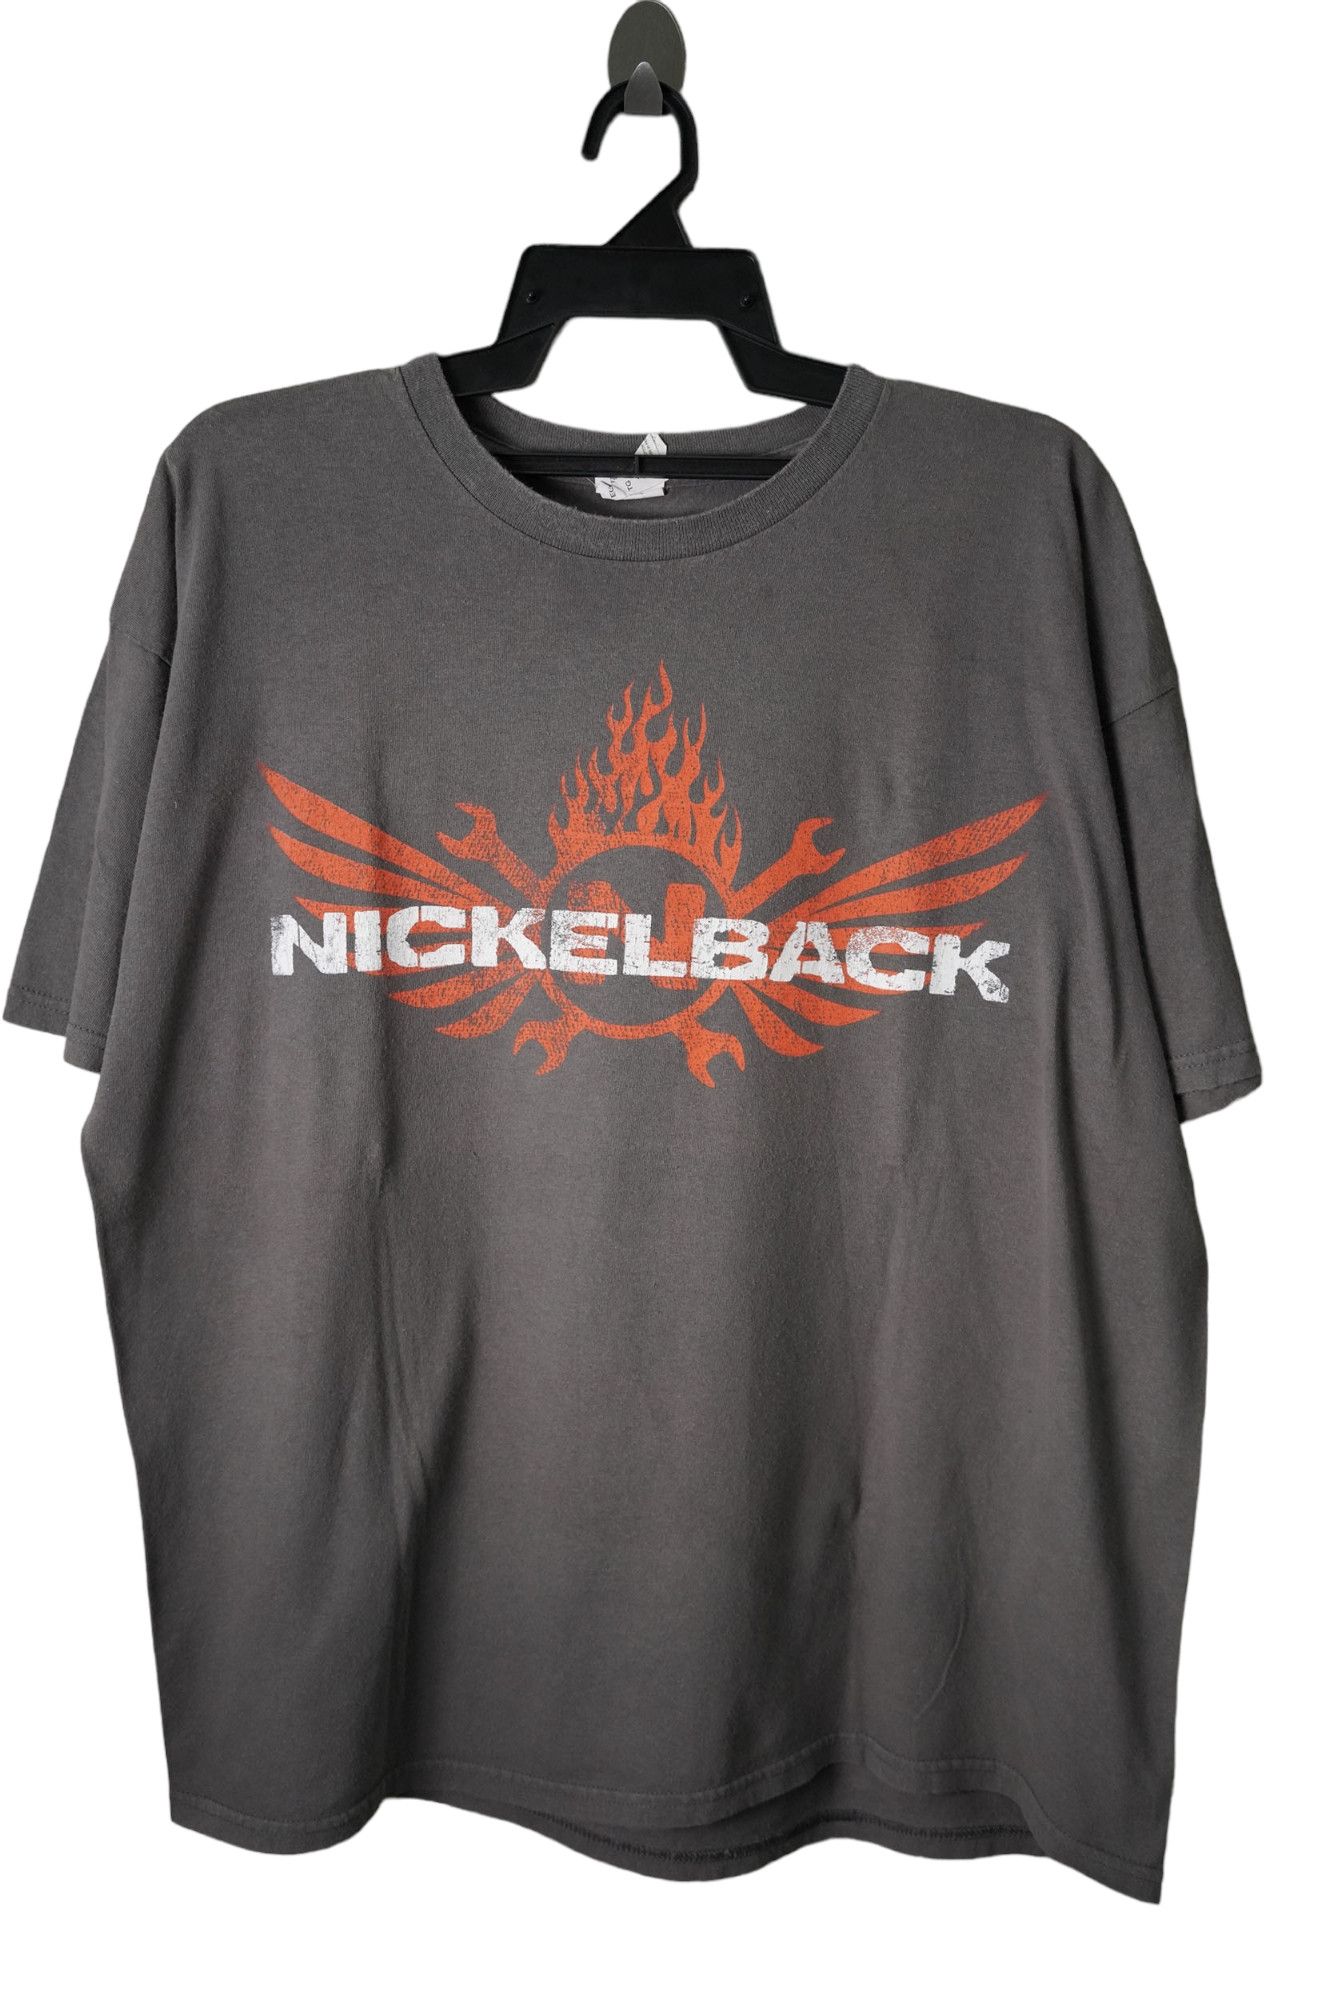 Tour Tee Nickelback Here and Now North American Tour 2012 Size US XL / EU 56 / 4 - 2 Preview